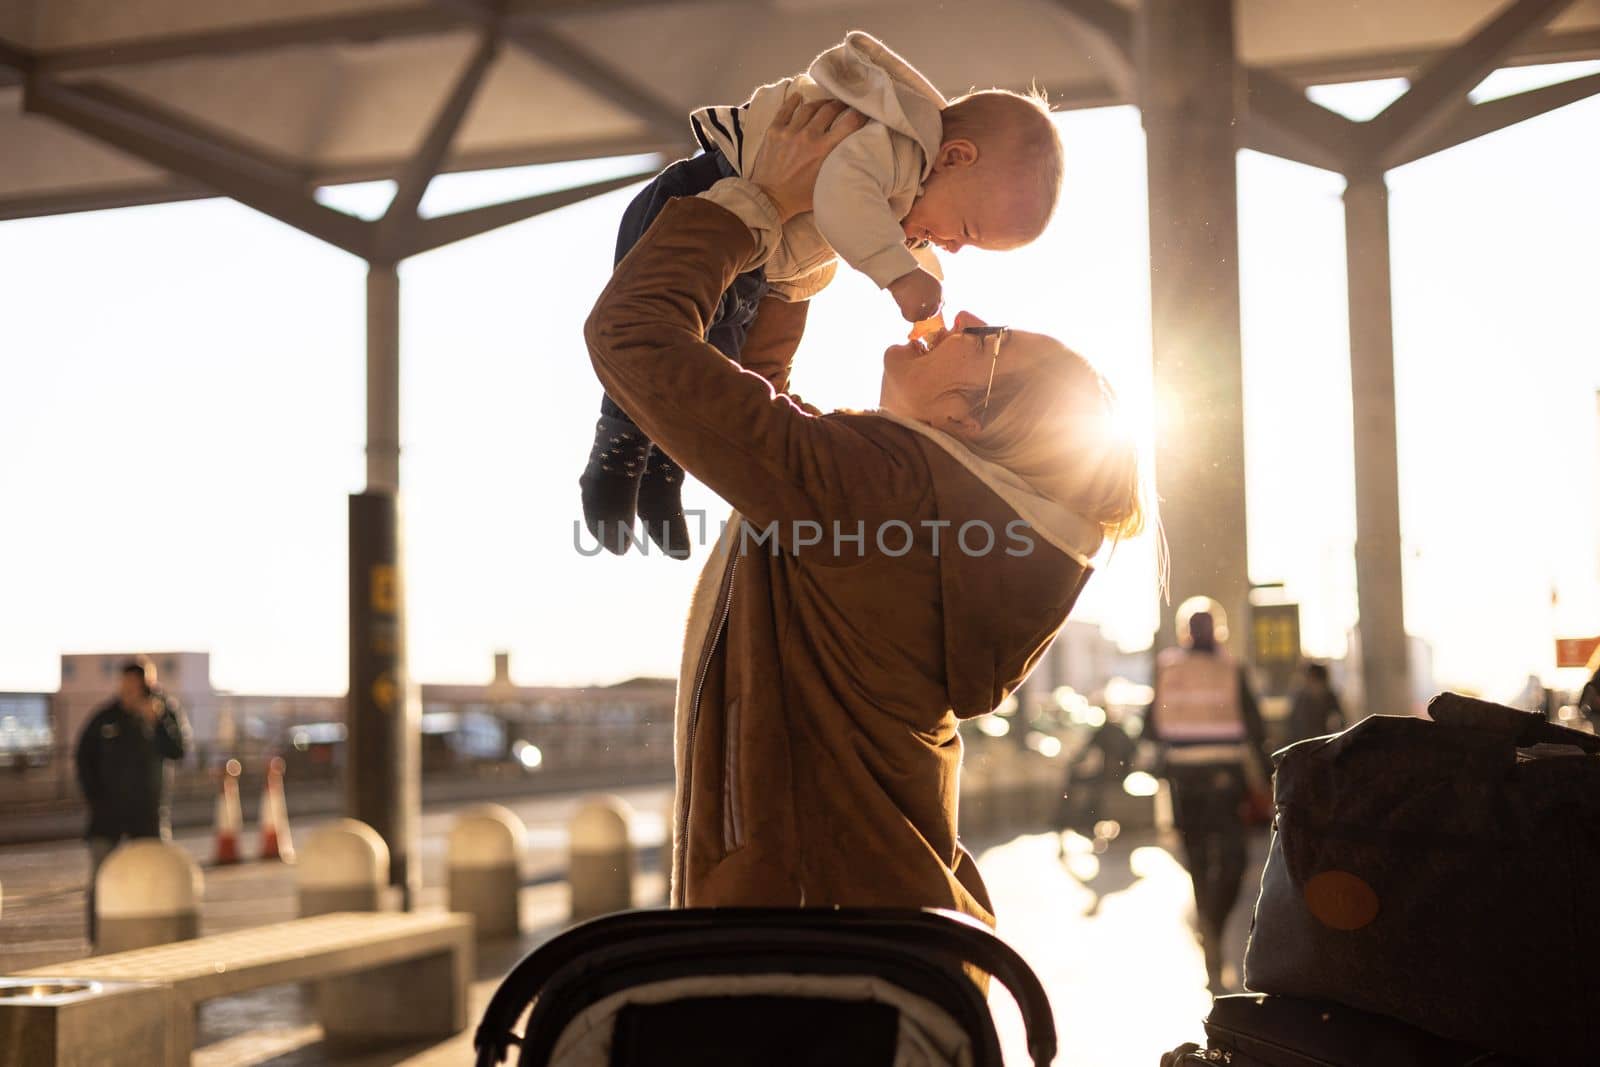 Motherat happily holding and lifting his infant baby boy child in the air after being rejunited in front of airport terminal station. Baby travel concept. by kasto